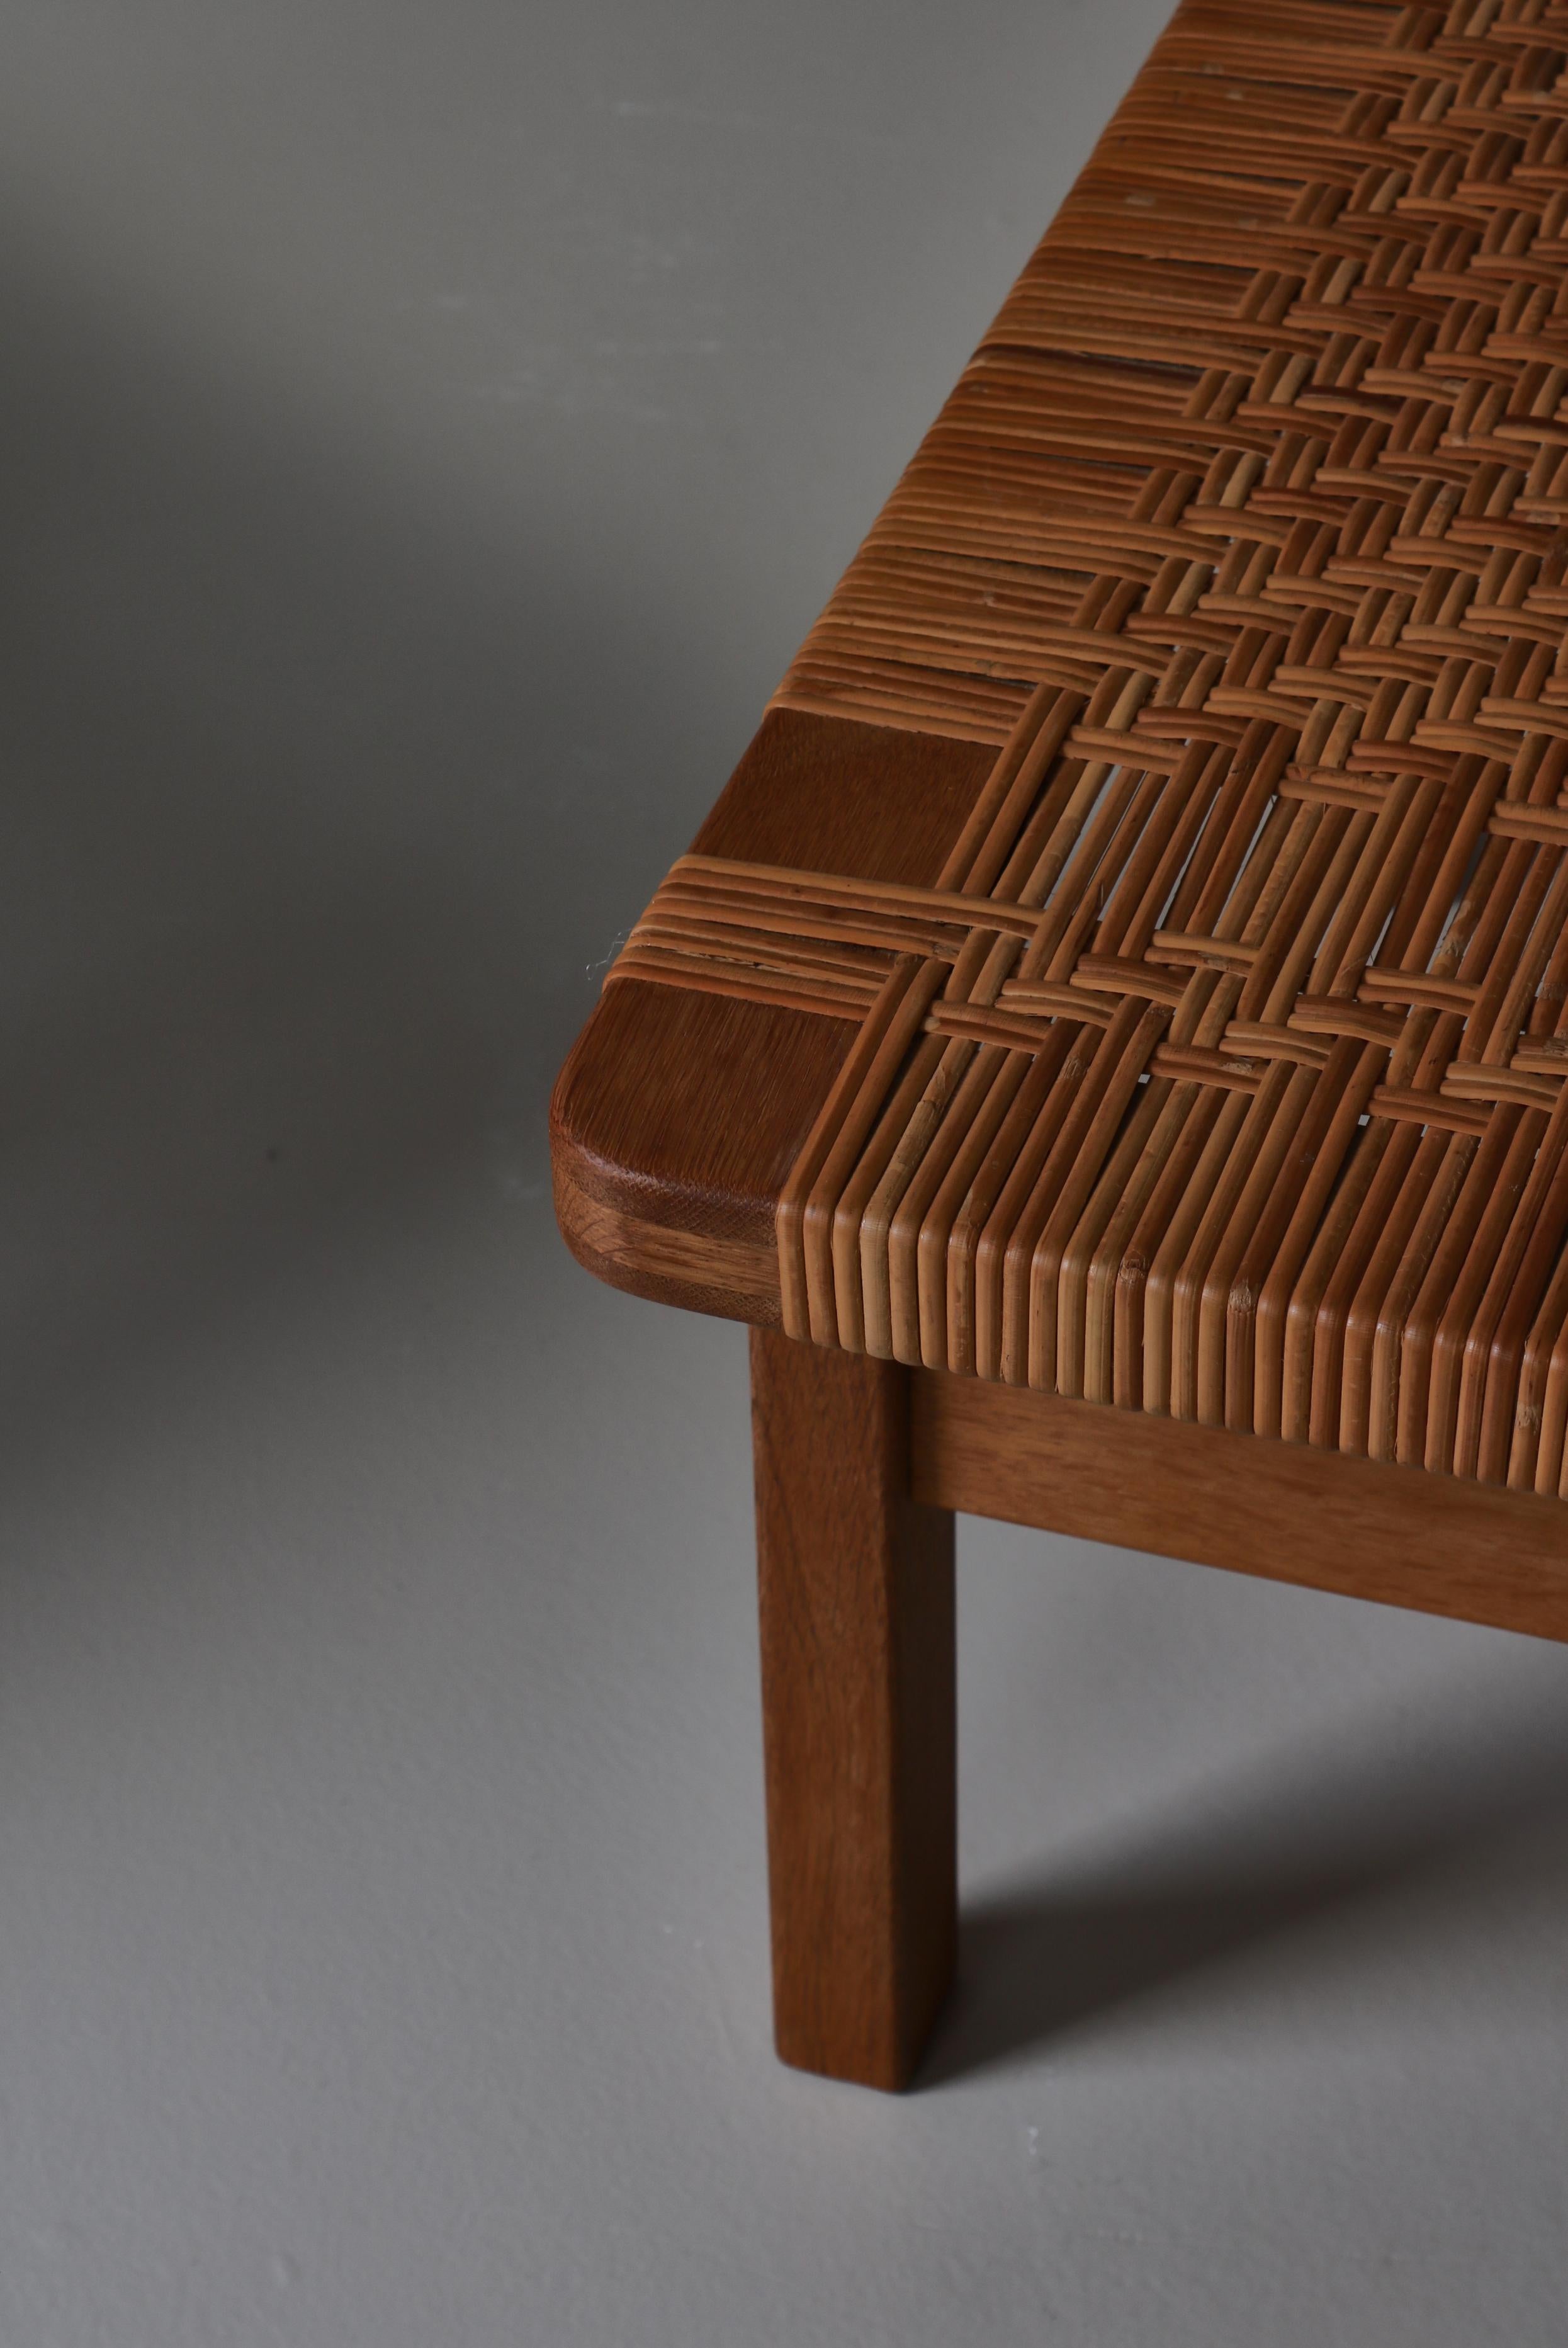 Borge Mogensen Set of Side Tables/Benches in Oak and Rattan Cane, 1960s, Denmark For Sale 1